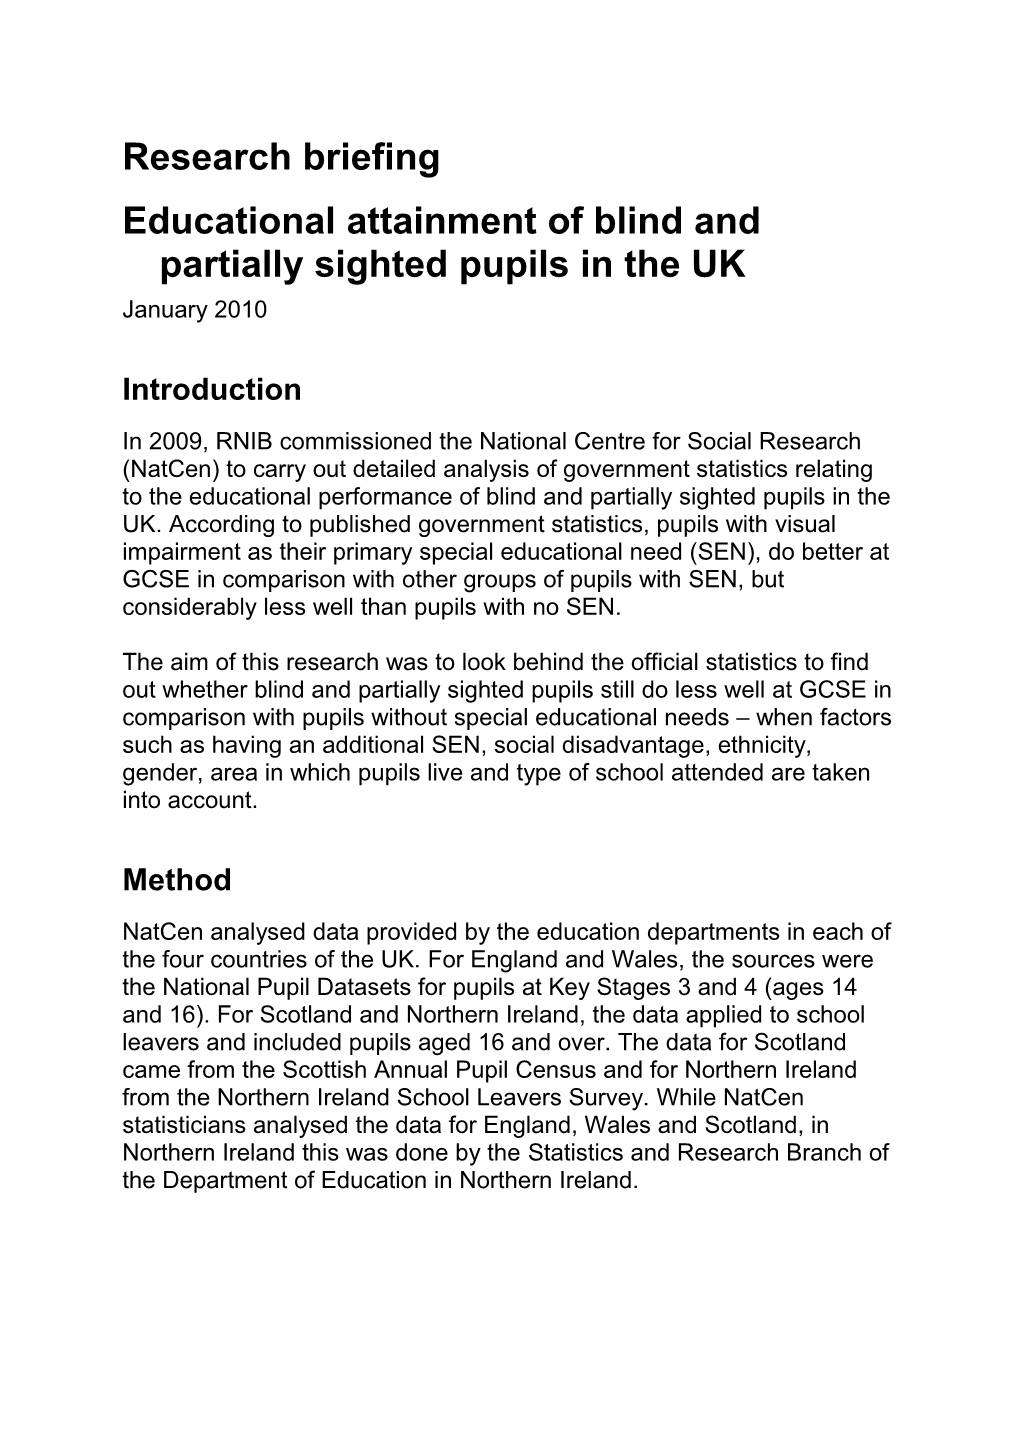 Educational Attainment Brief for UK